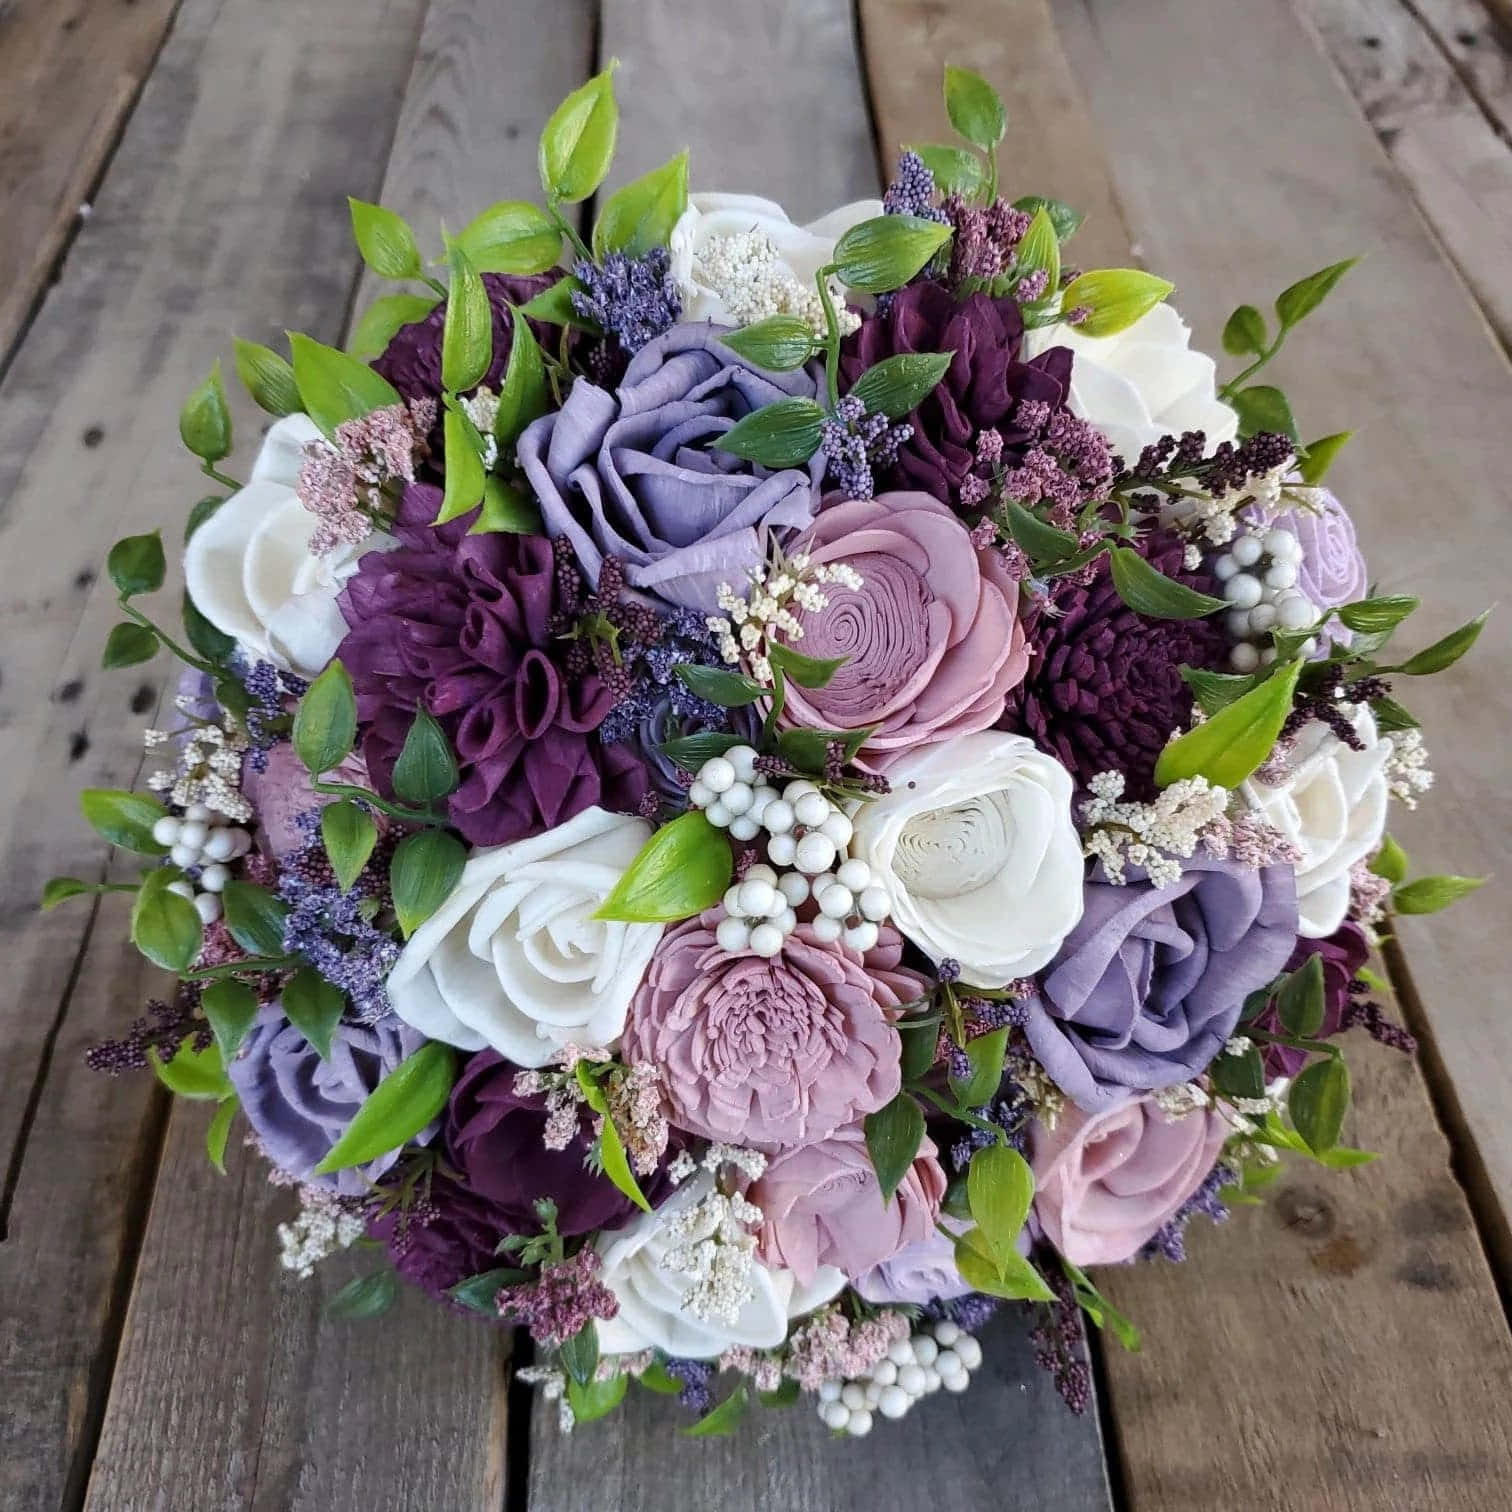 A Bouquet Of Purple And White Flowers On A Wooden Table